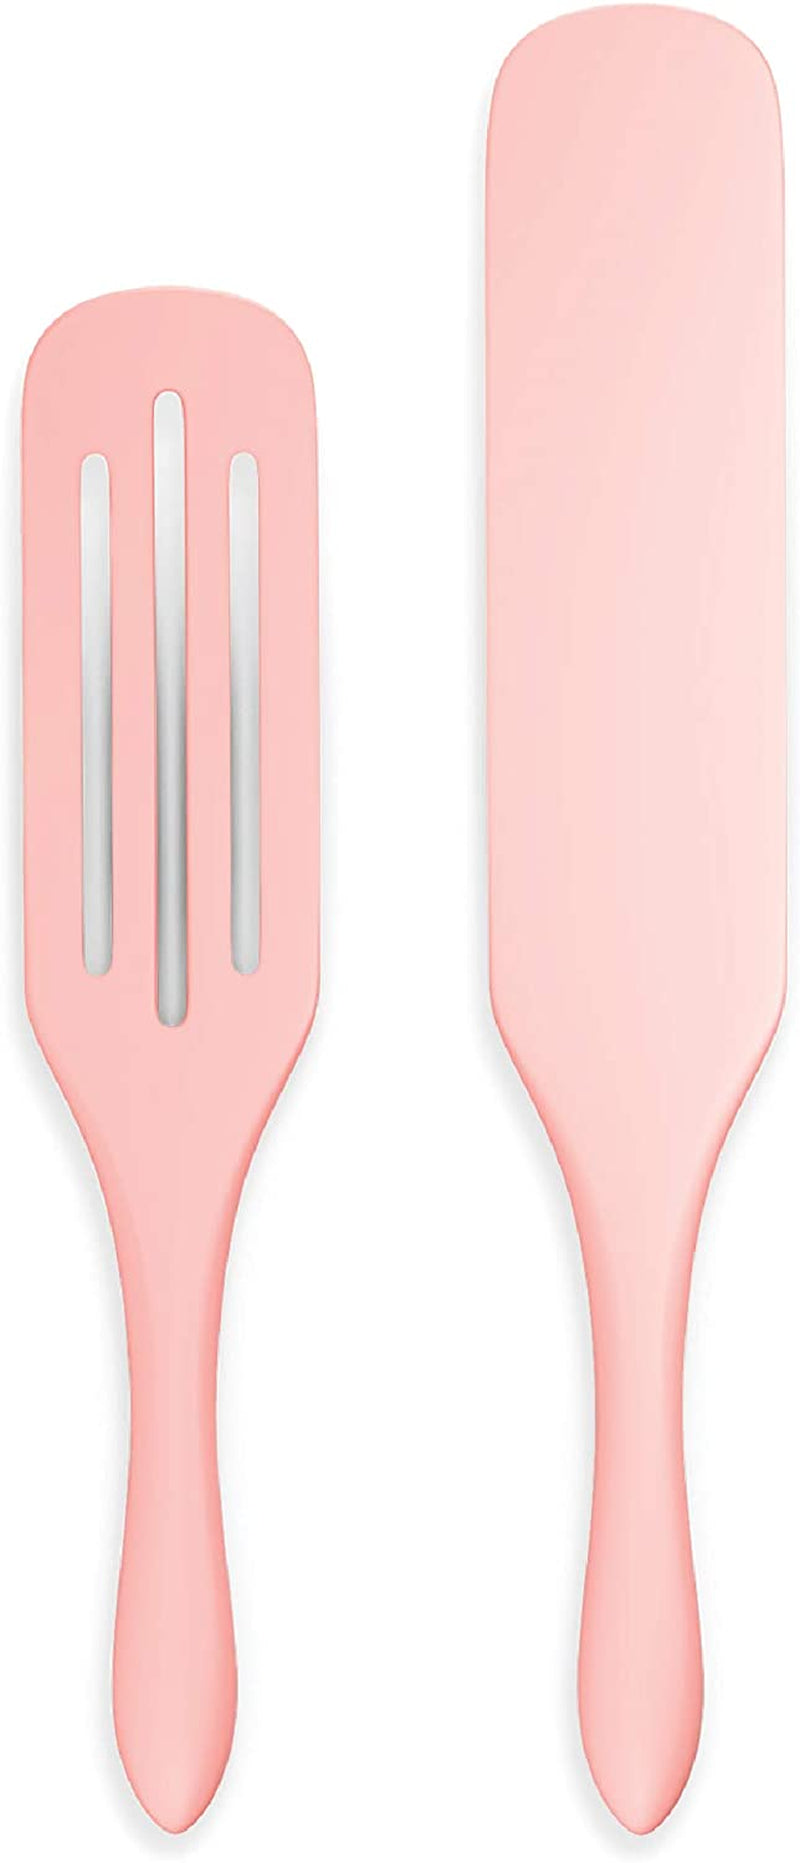 Mad Hungry Spurtle Silicone Set 2-Piece - Kitchen Spatula Spoon Tools for Cooking, Narrow Jar Scraper, Mixing Spoons, Icing Cake & Frosting Knife Spreader, Slim & Slotted Thin Paddle Spurtles Utensil Home & Garden > Kitchen & Dining > Kitchen Tools & Utensils Mad Hungry Pastel Pink  